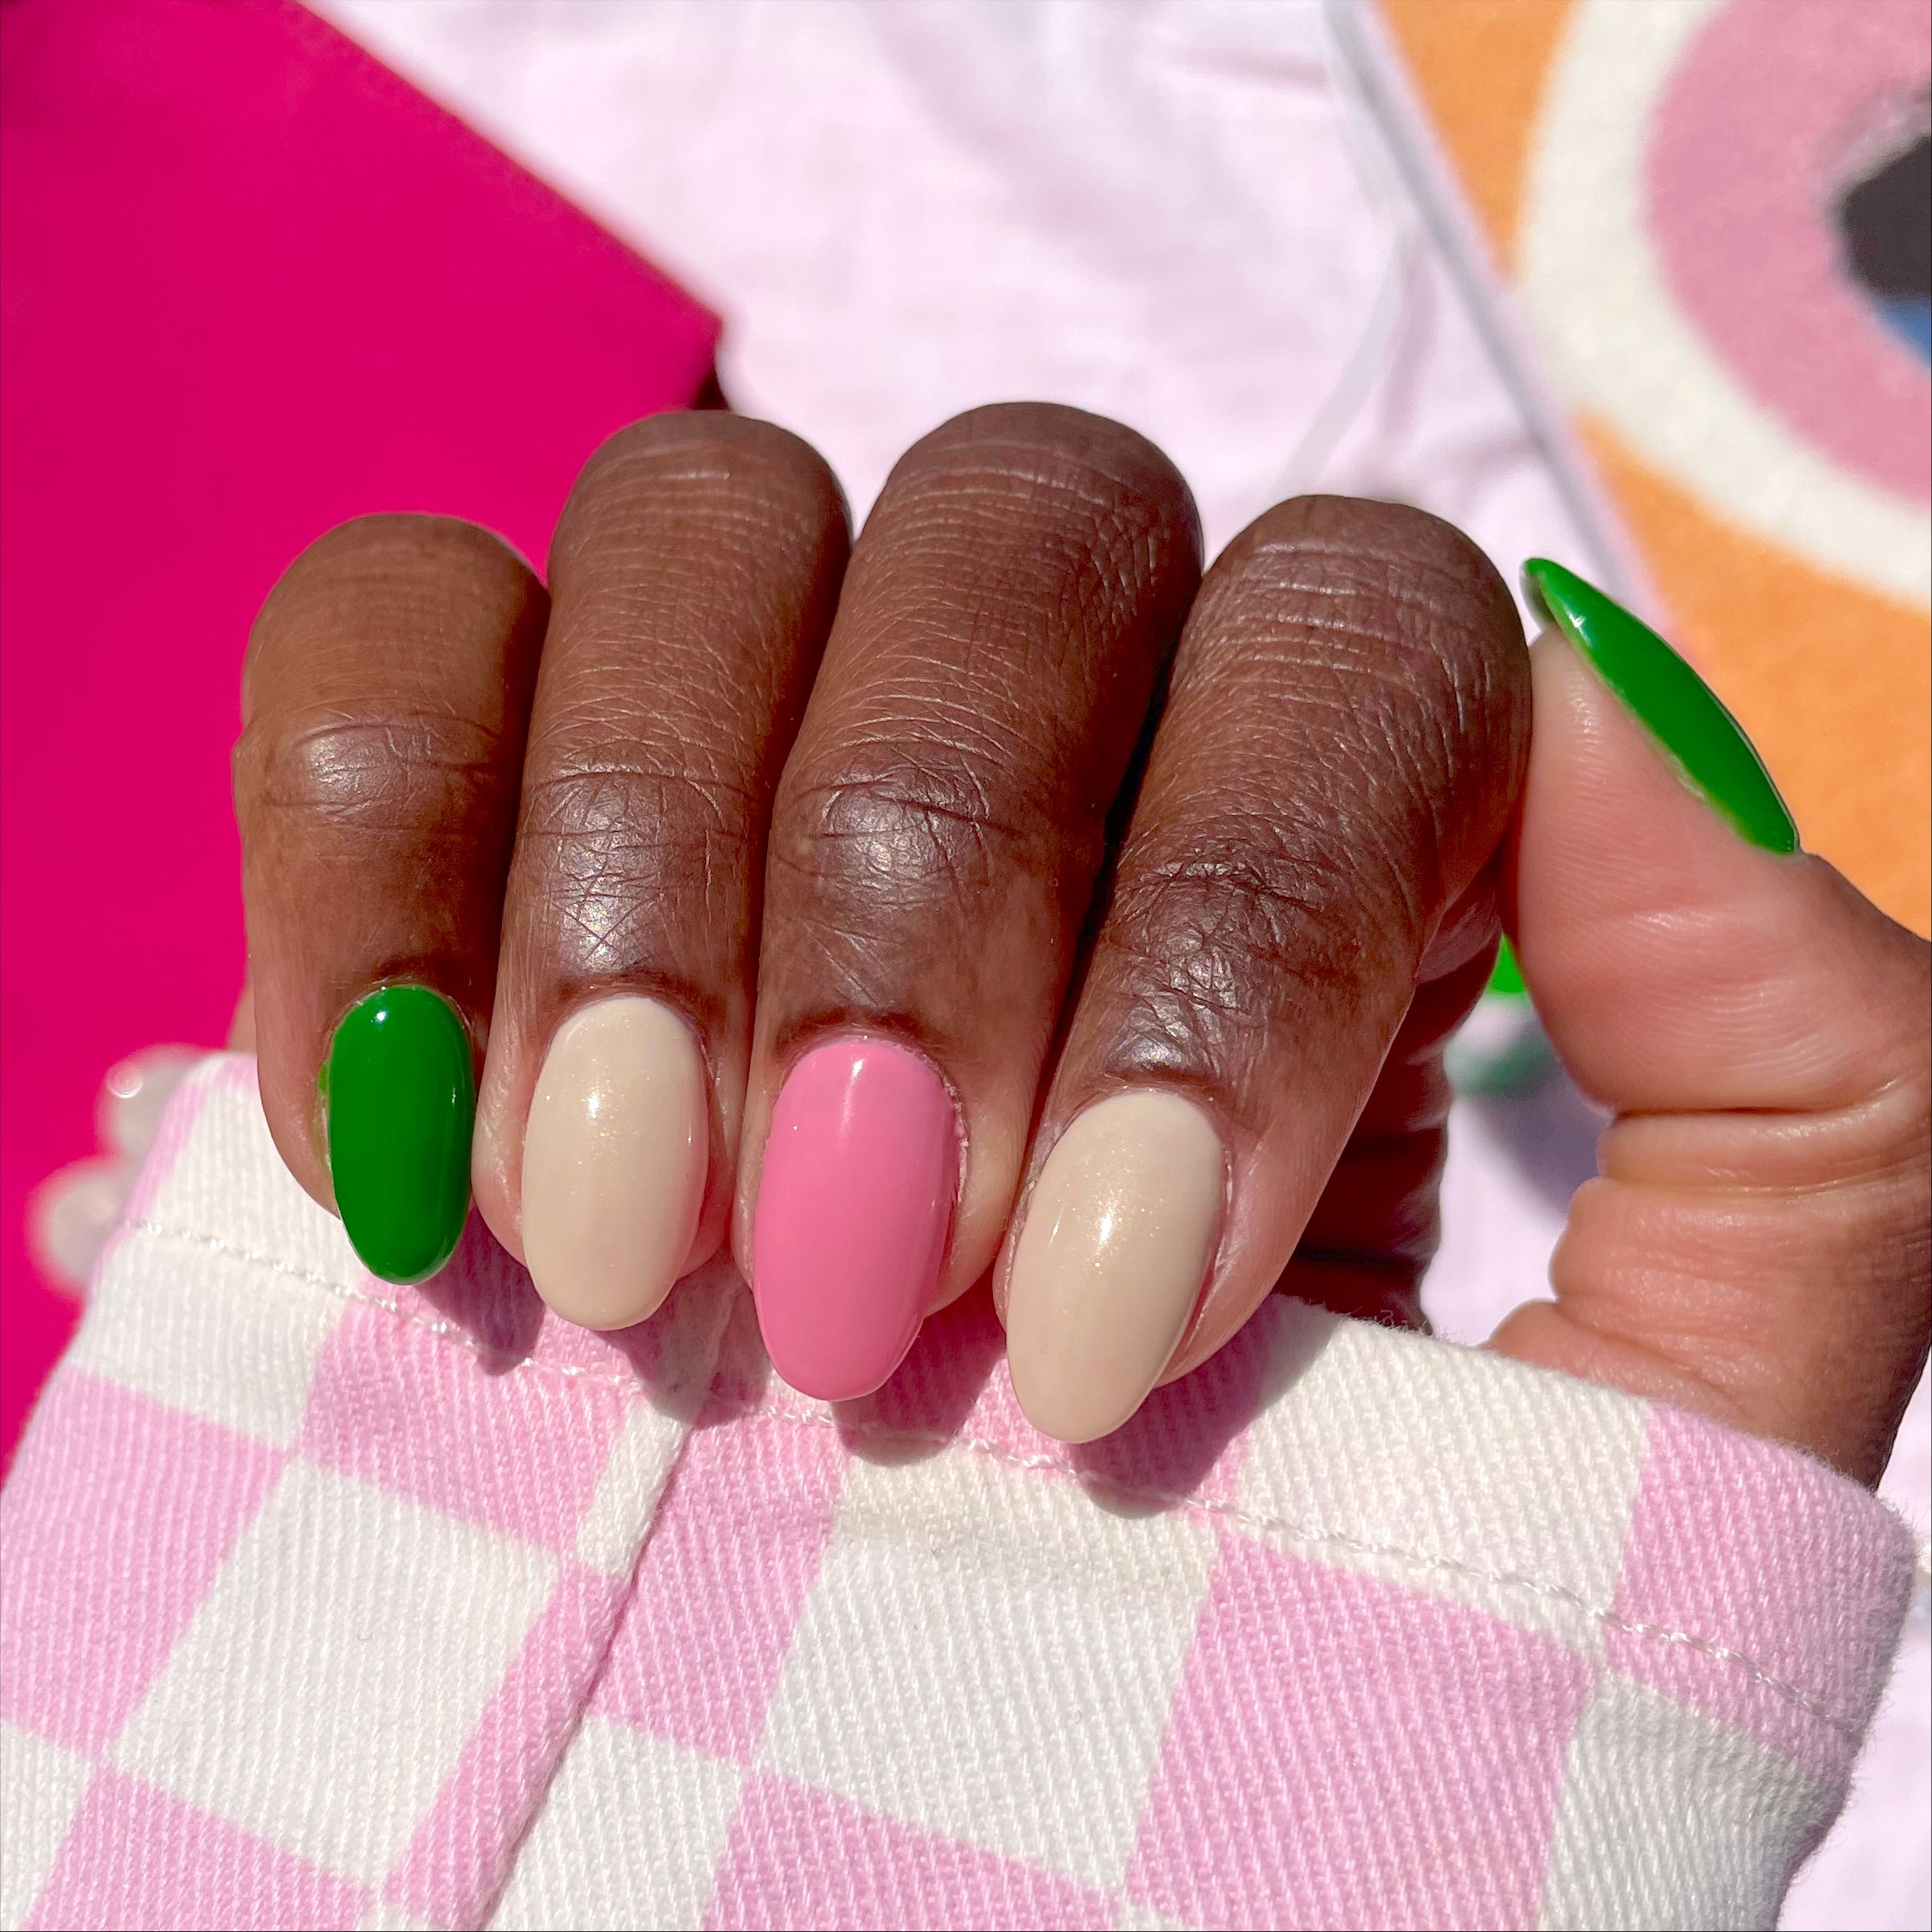 LMM x Heluviee: 3 Nail Looks to Try Now!